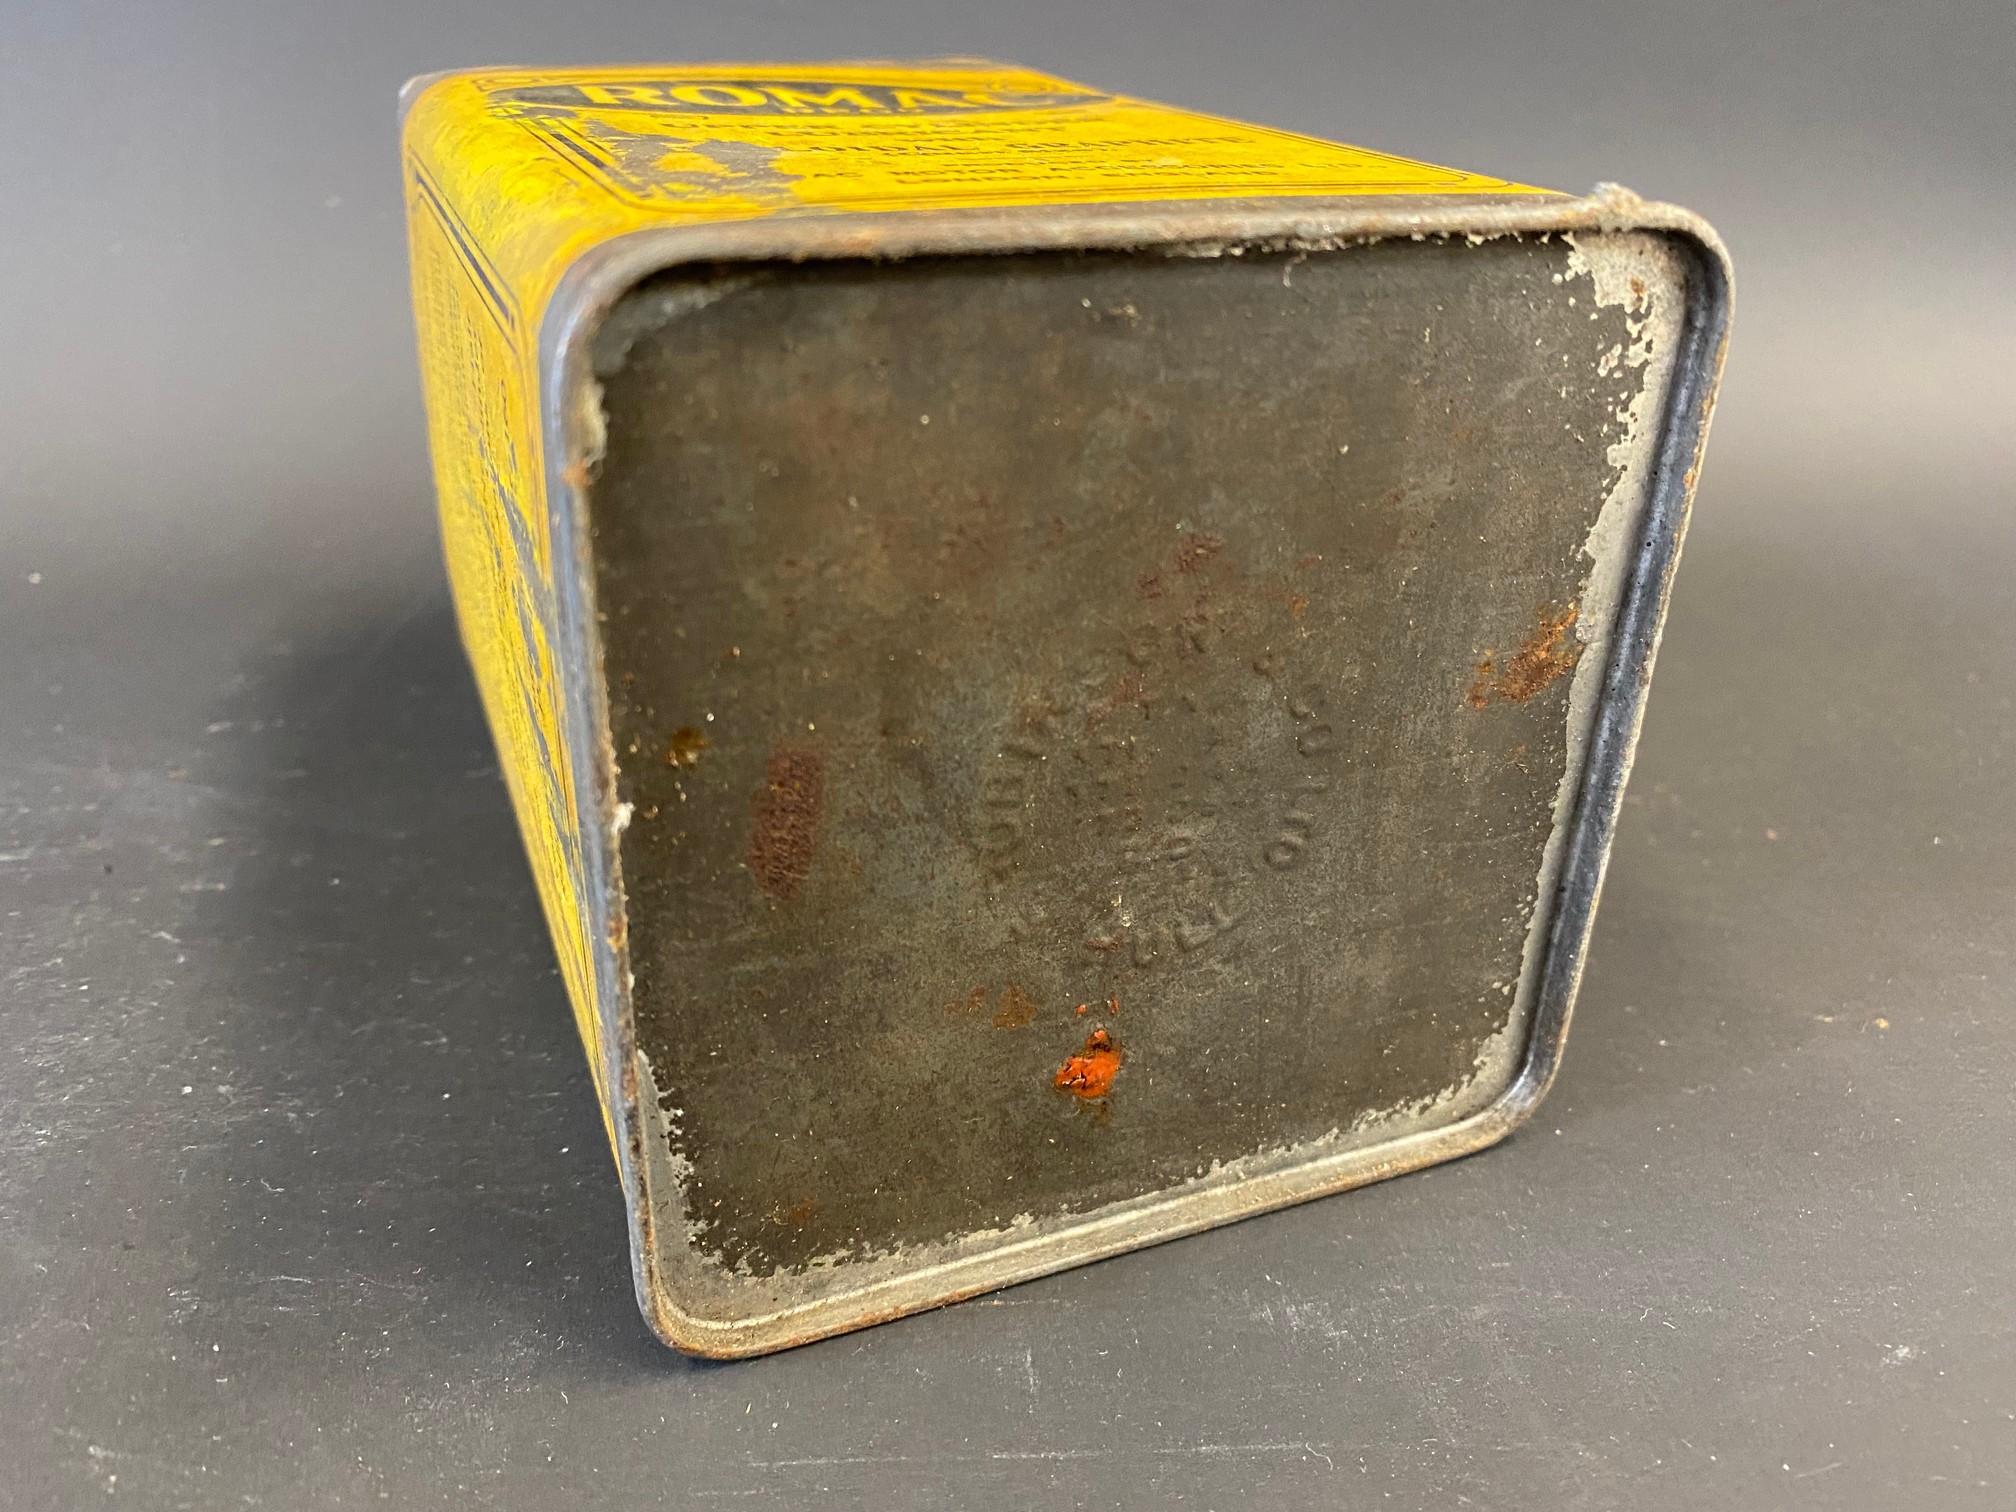 A Romac Upper Cylinder Lubricant pyramid can. - Image 6 of 6